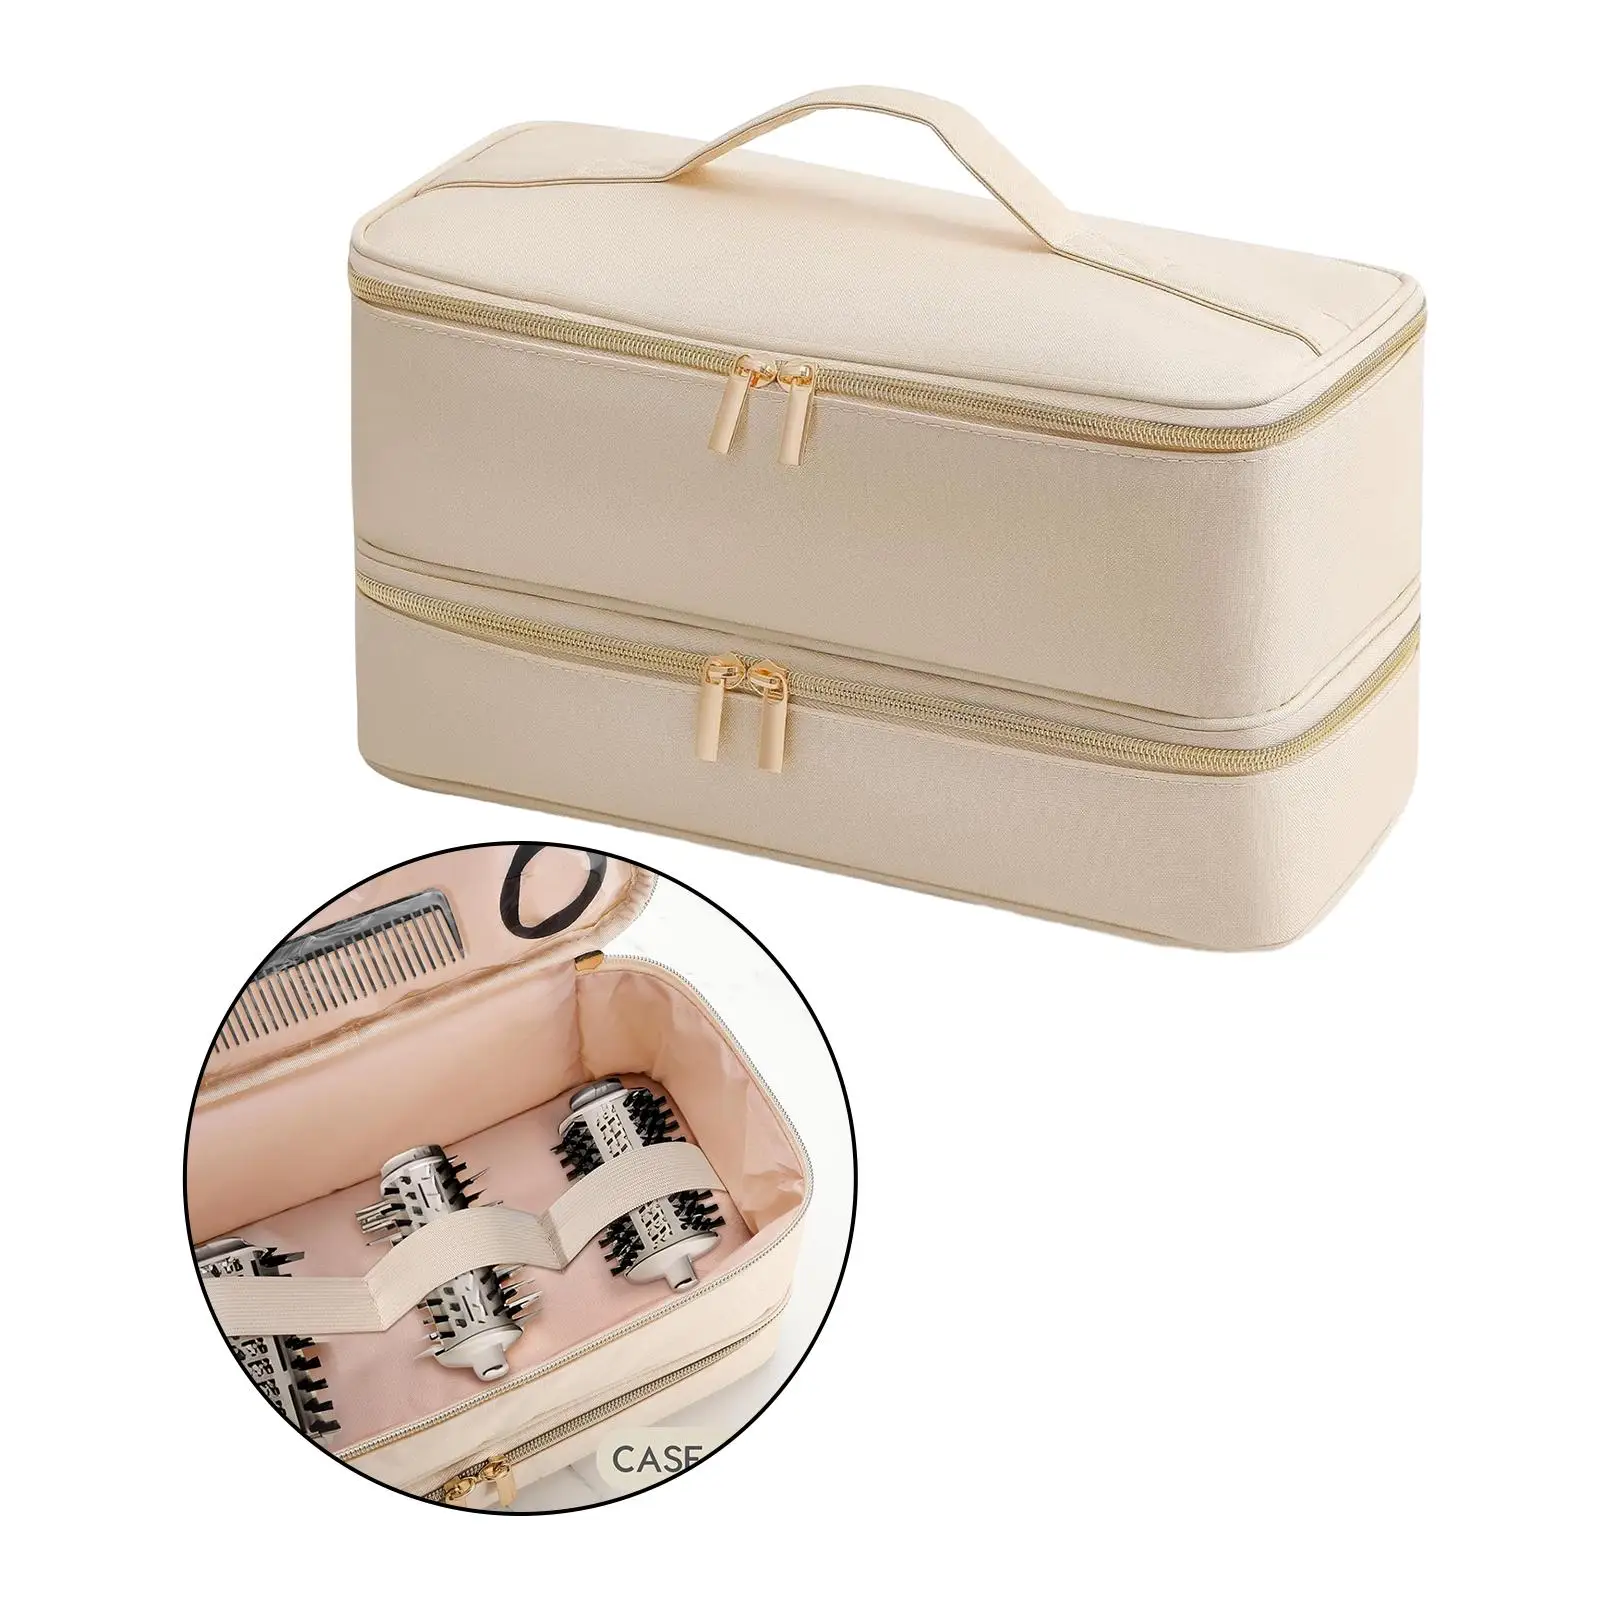 Double Layer Travel Carrying Case Portable Storage Organizer Bag for Travel Hair Curler Accessories Hair Dryer Bathroom Styler